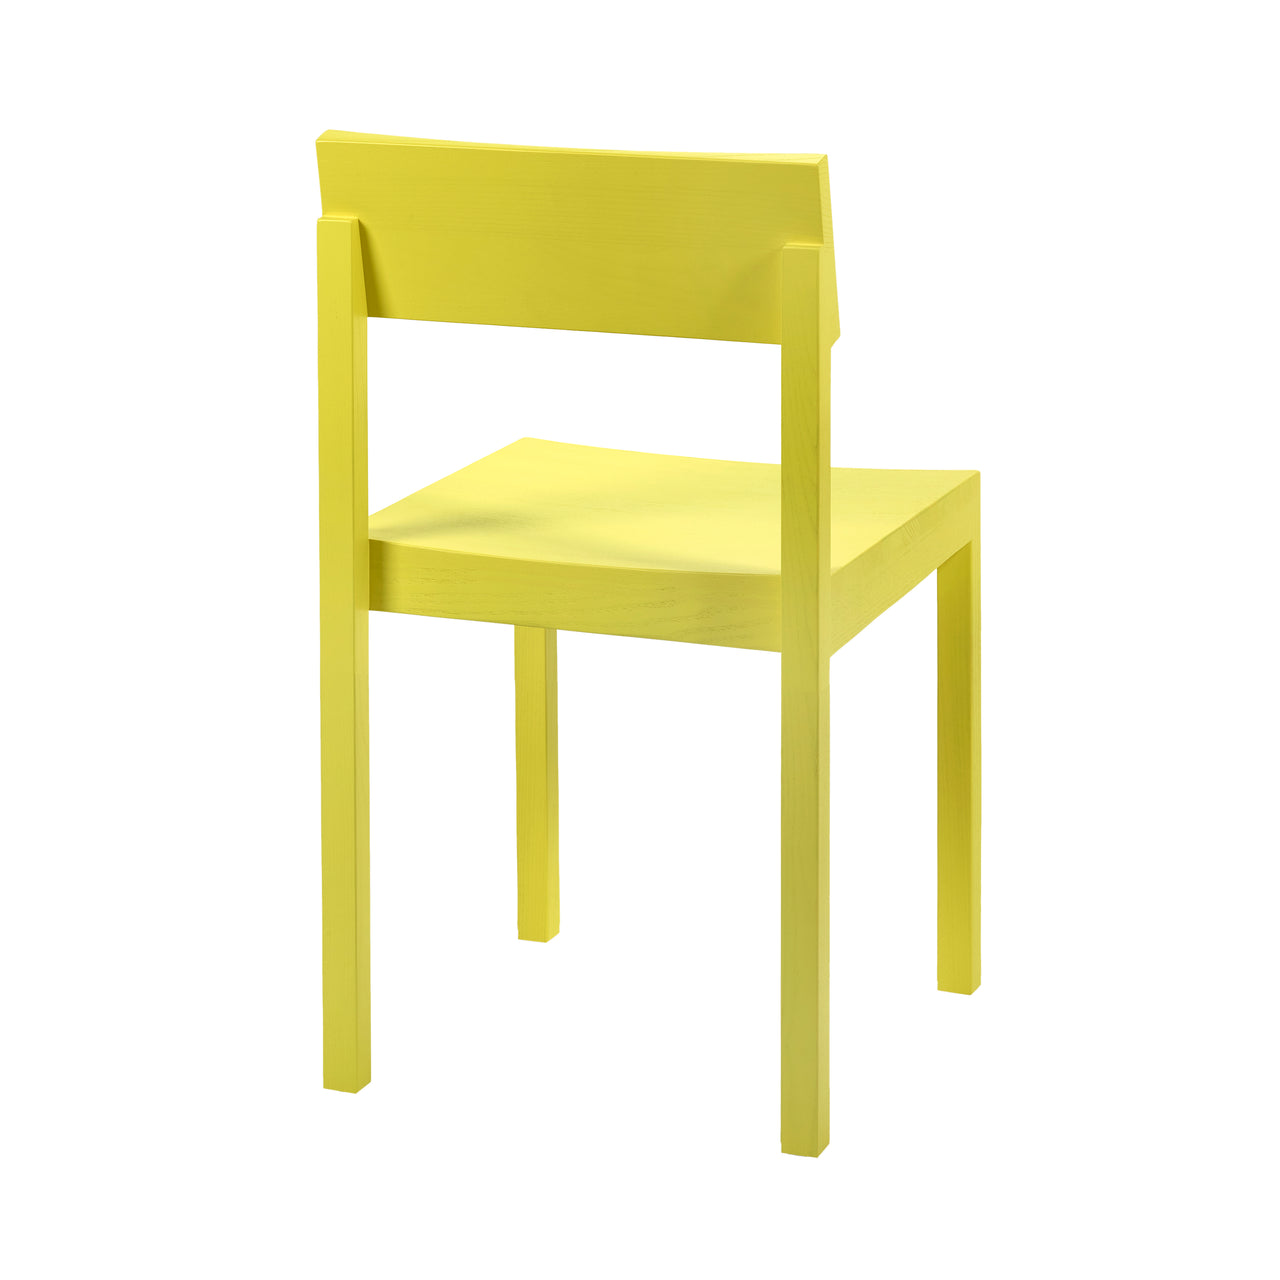 Silent Chair: Without Arm + Sun